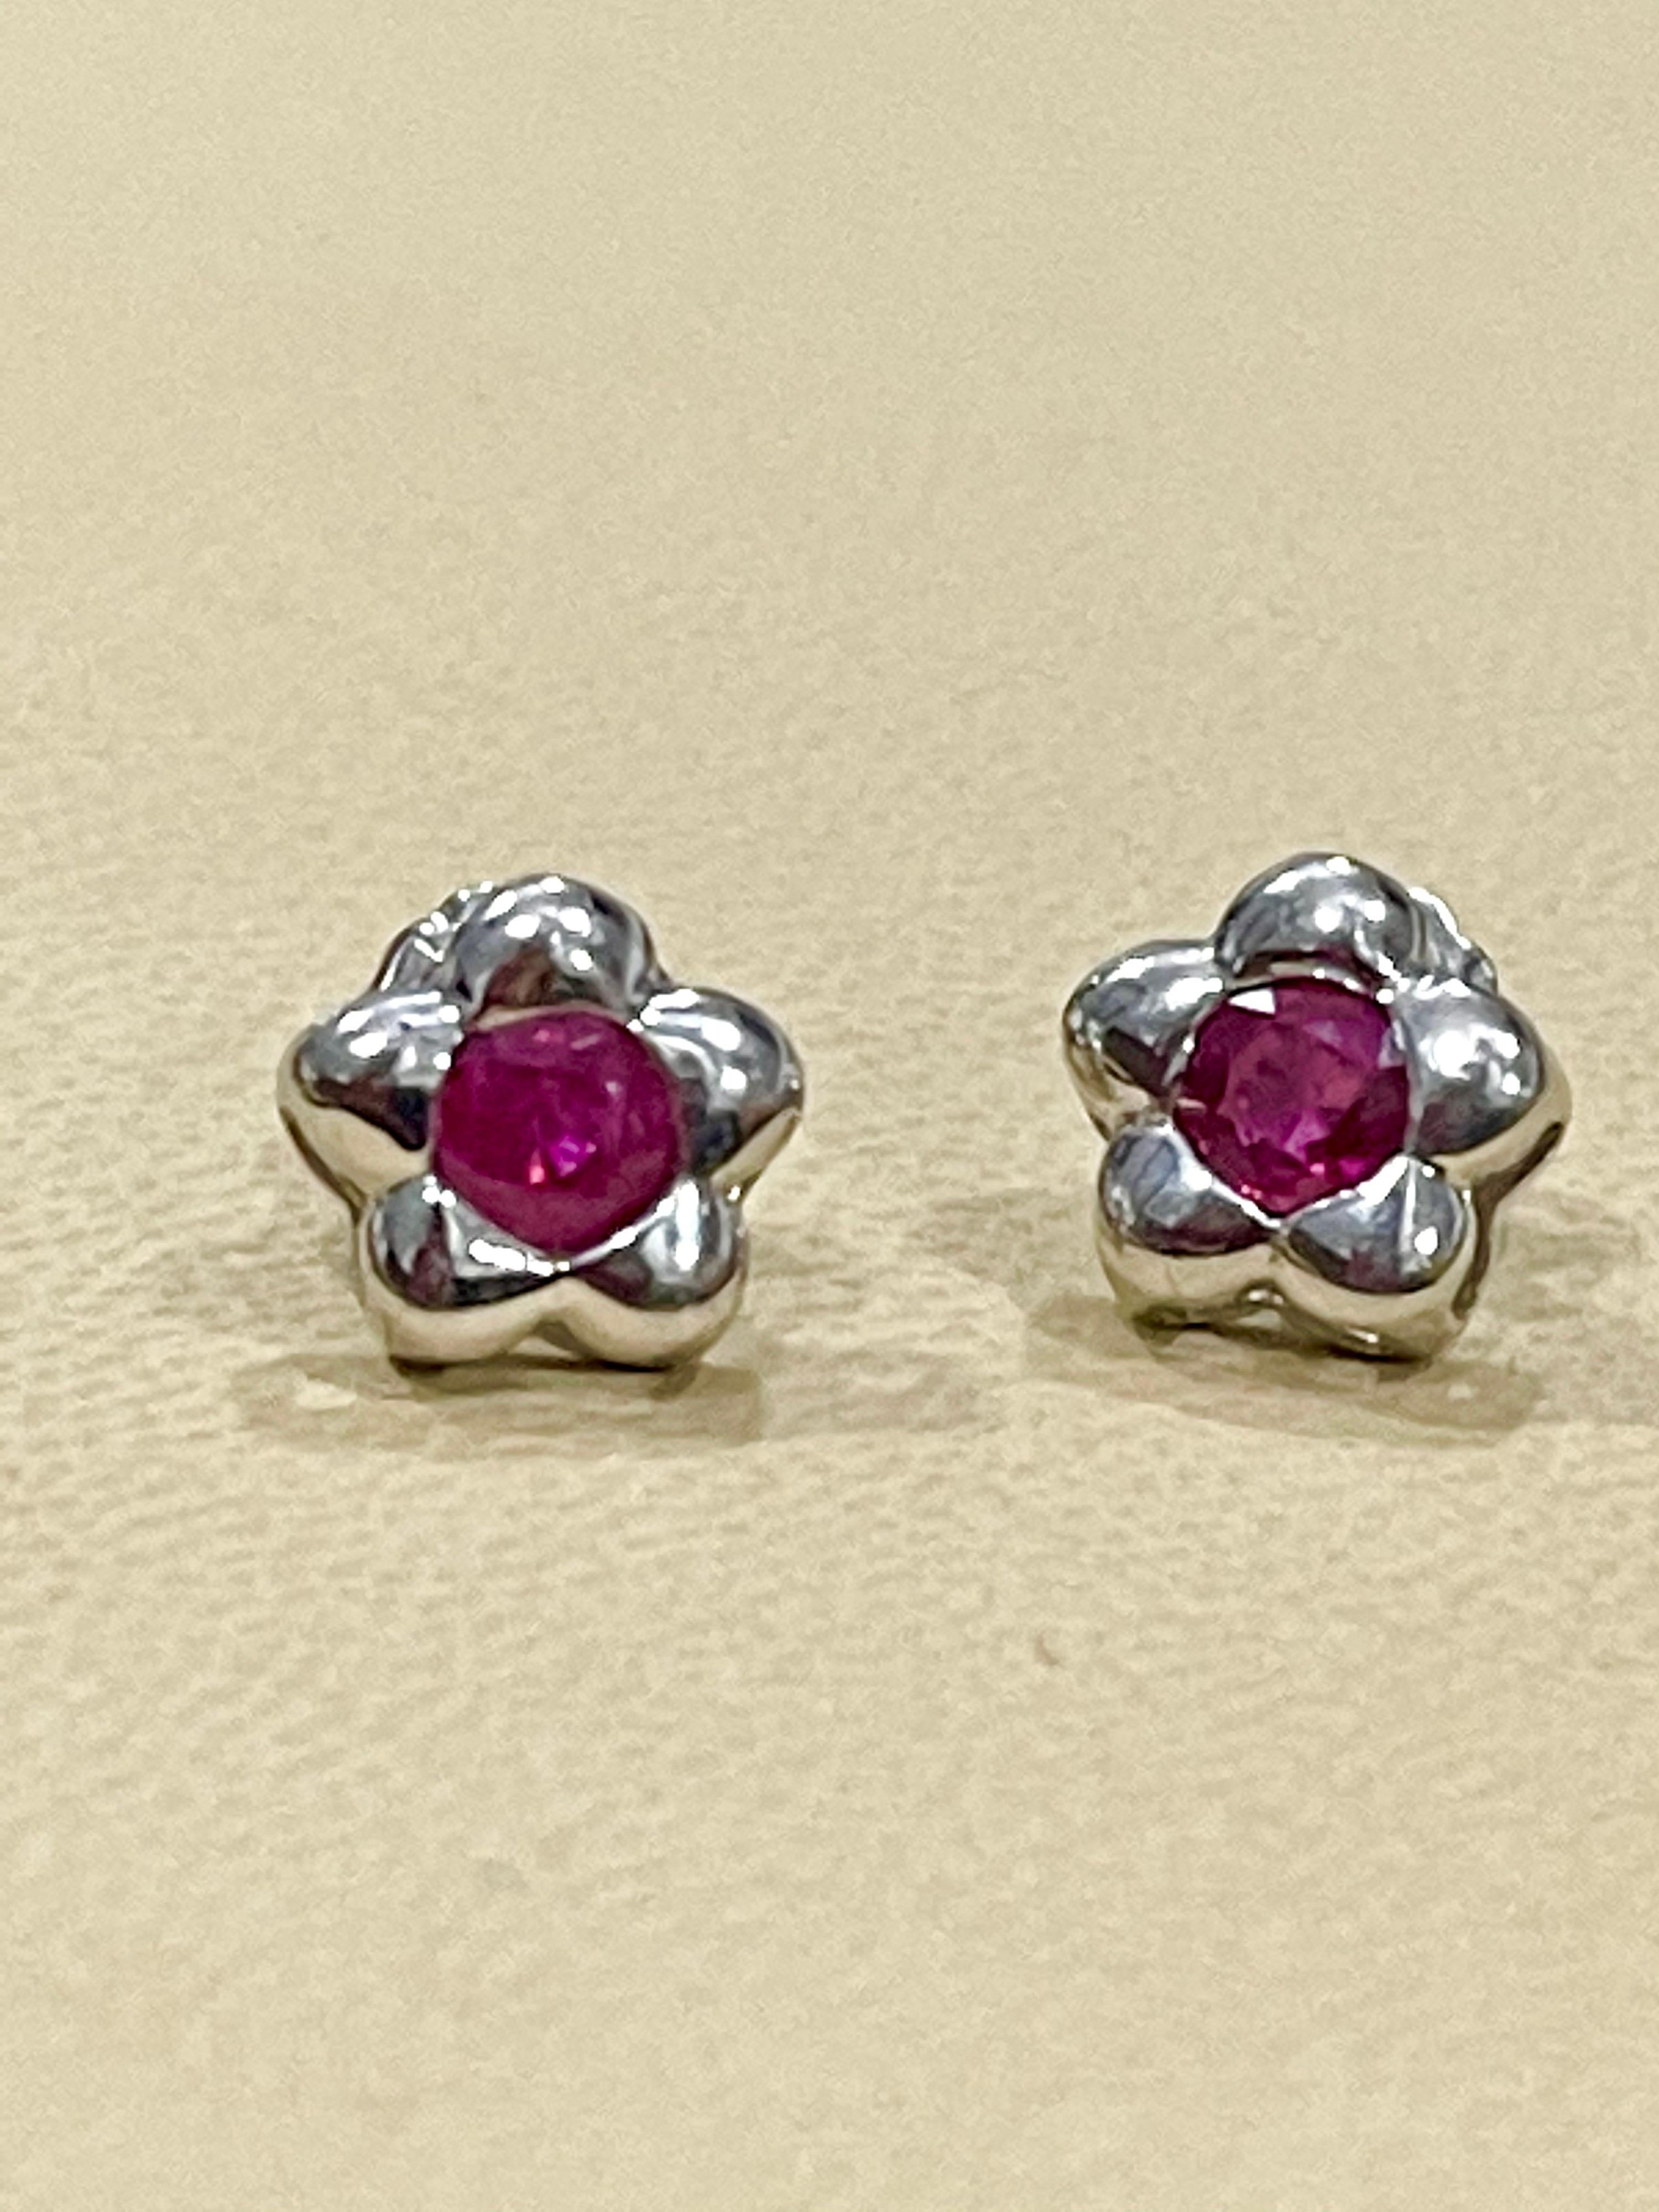 1 Carat Natural Round Ruby Stud Earrings 14 Karat White Gold, Post Back For Sale 1